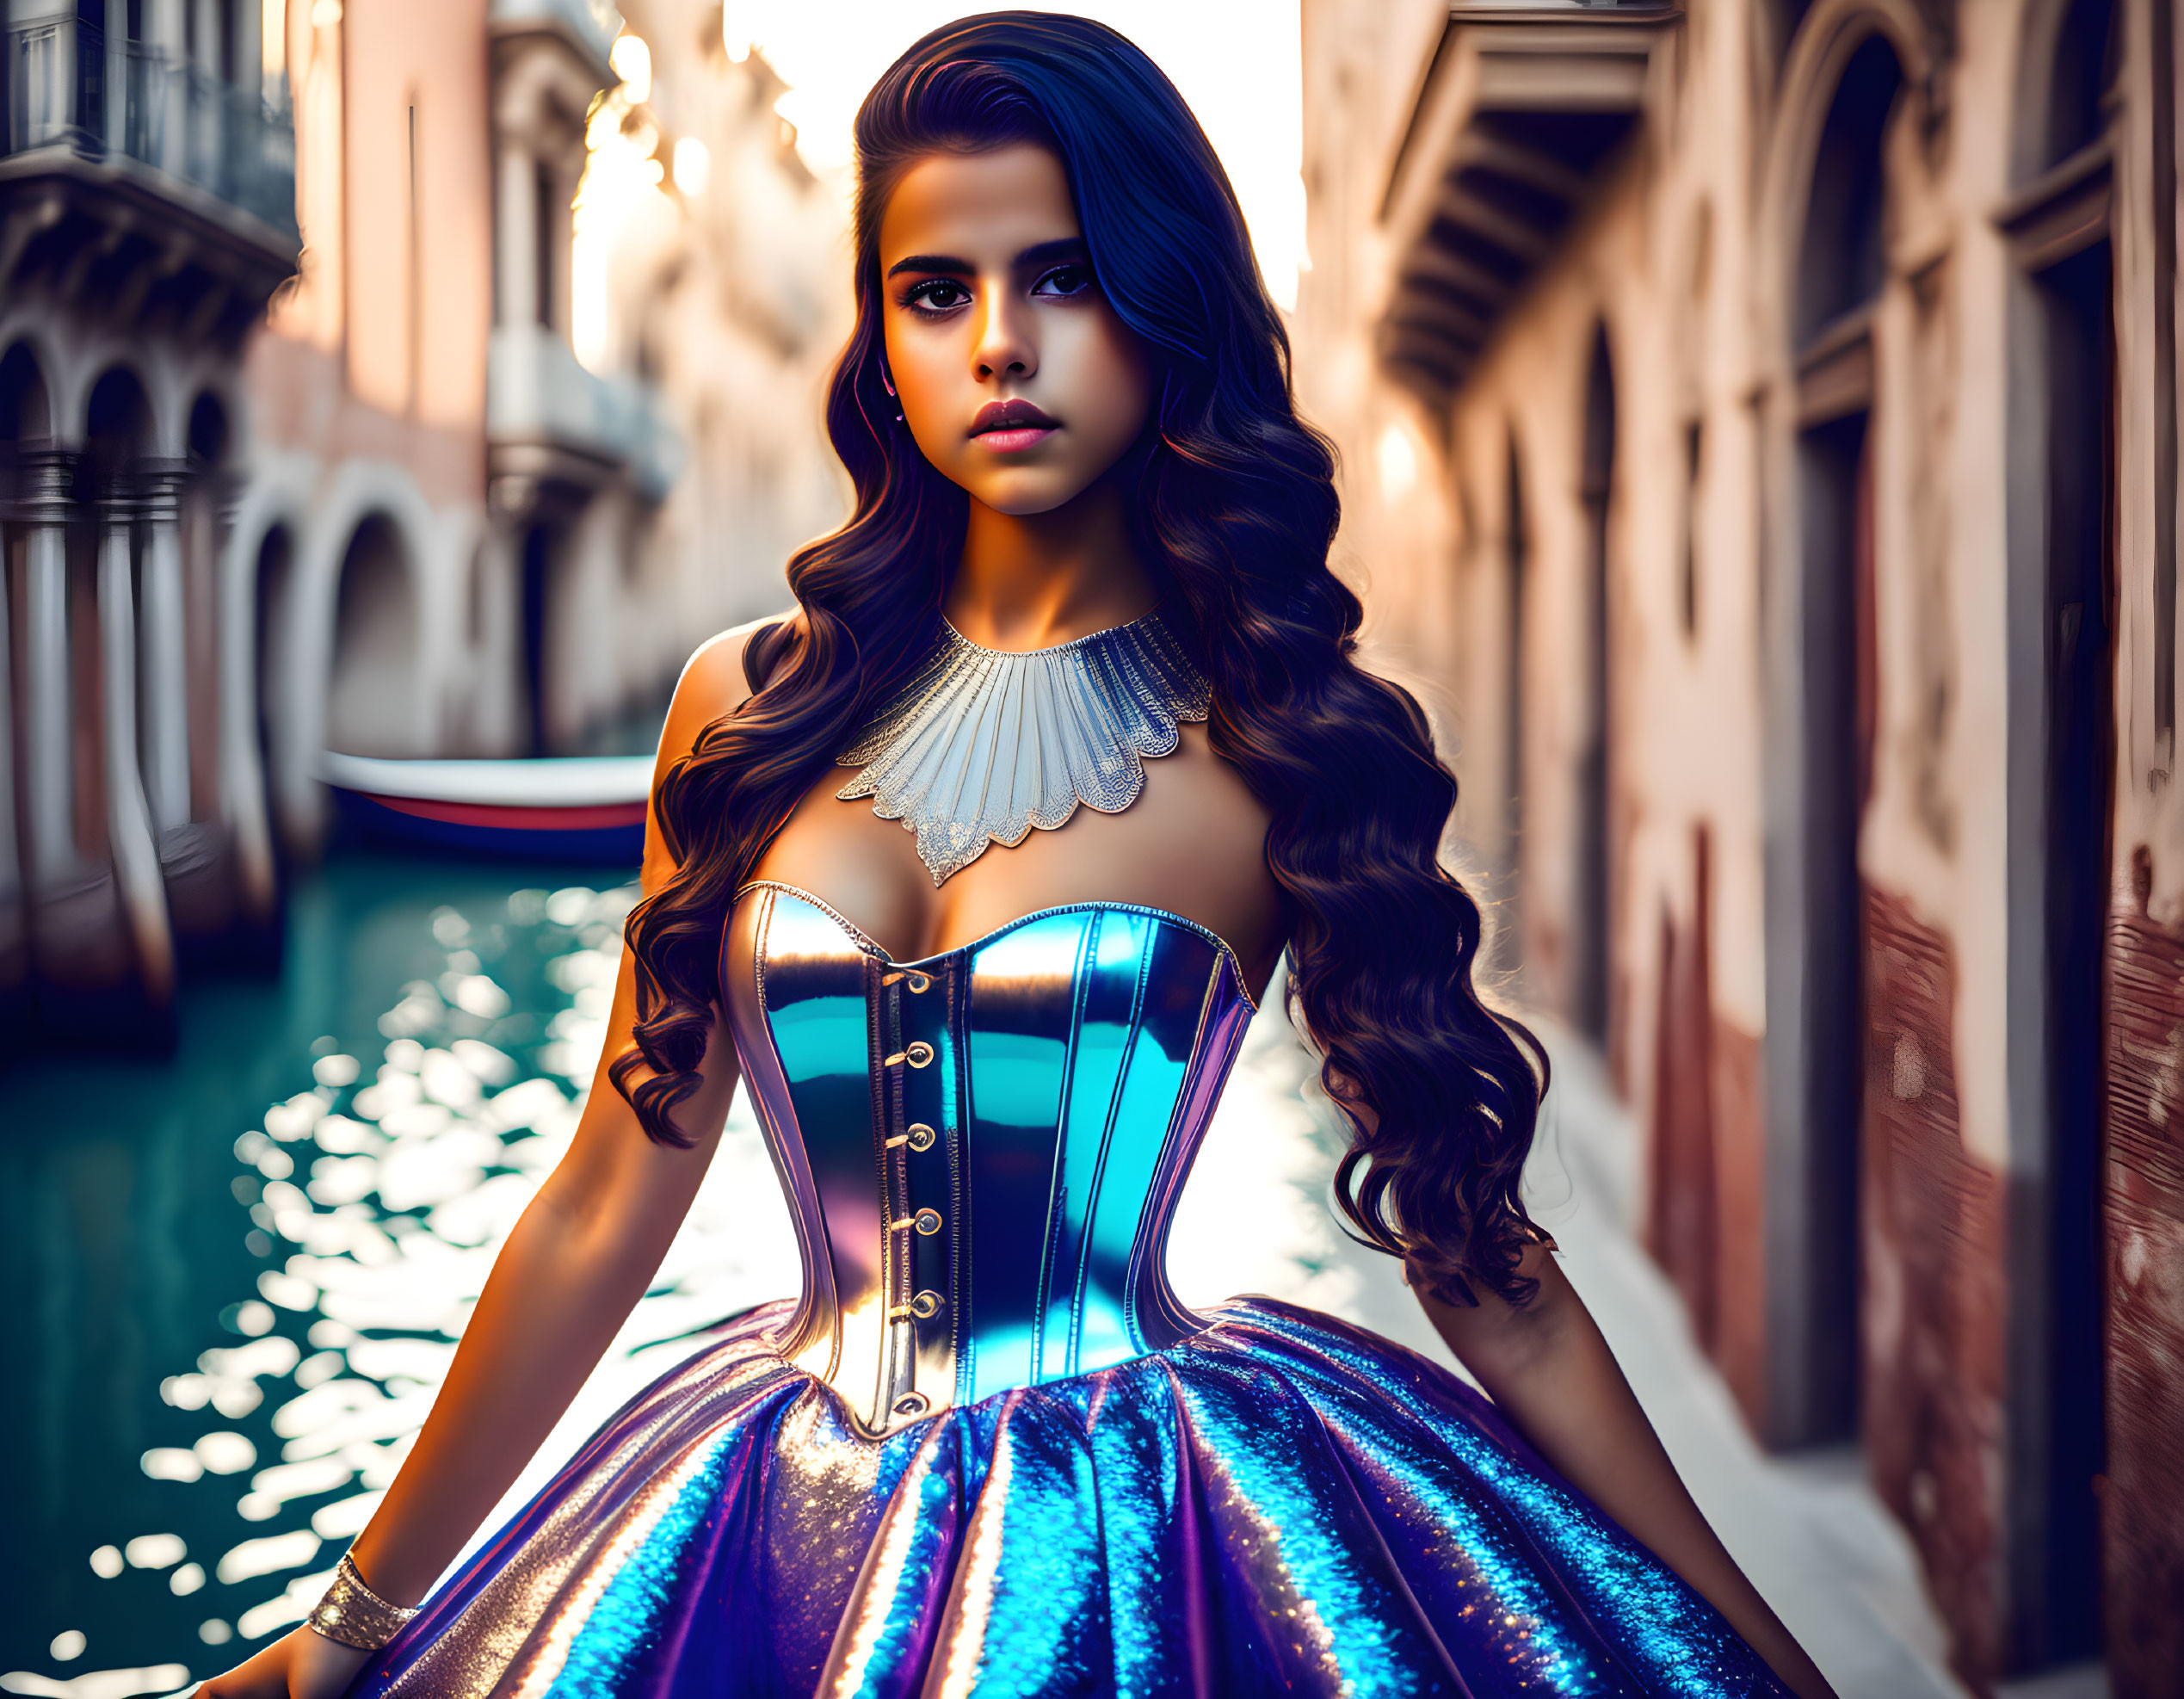 Elegant young woman in vibrant blue corset dress by picturesque canal